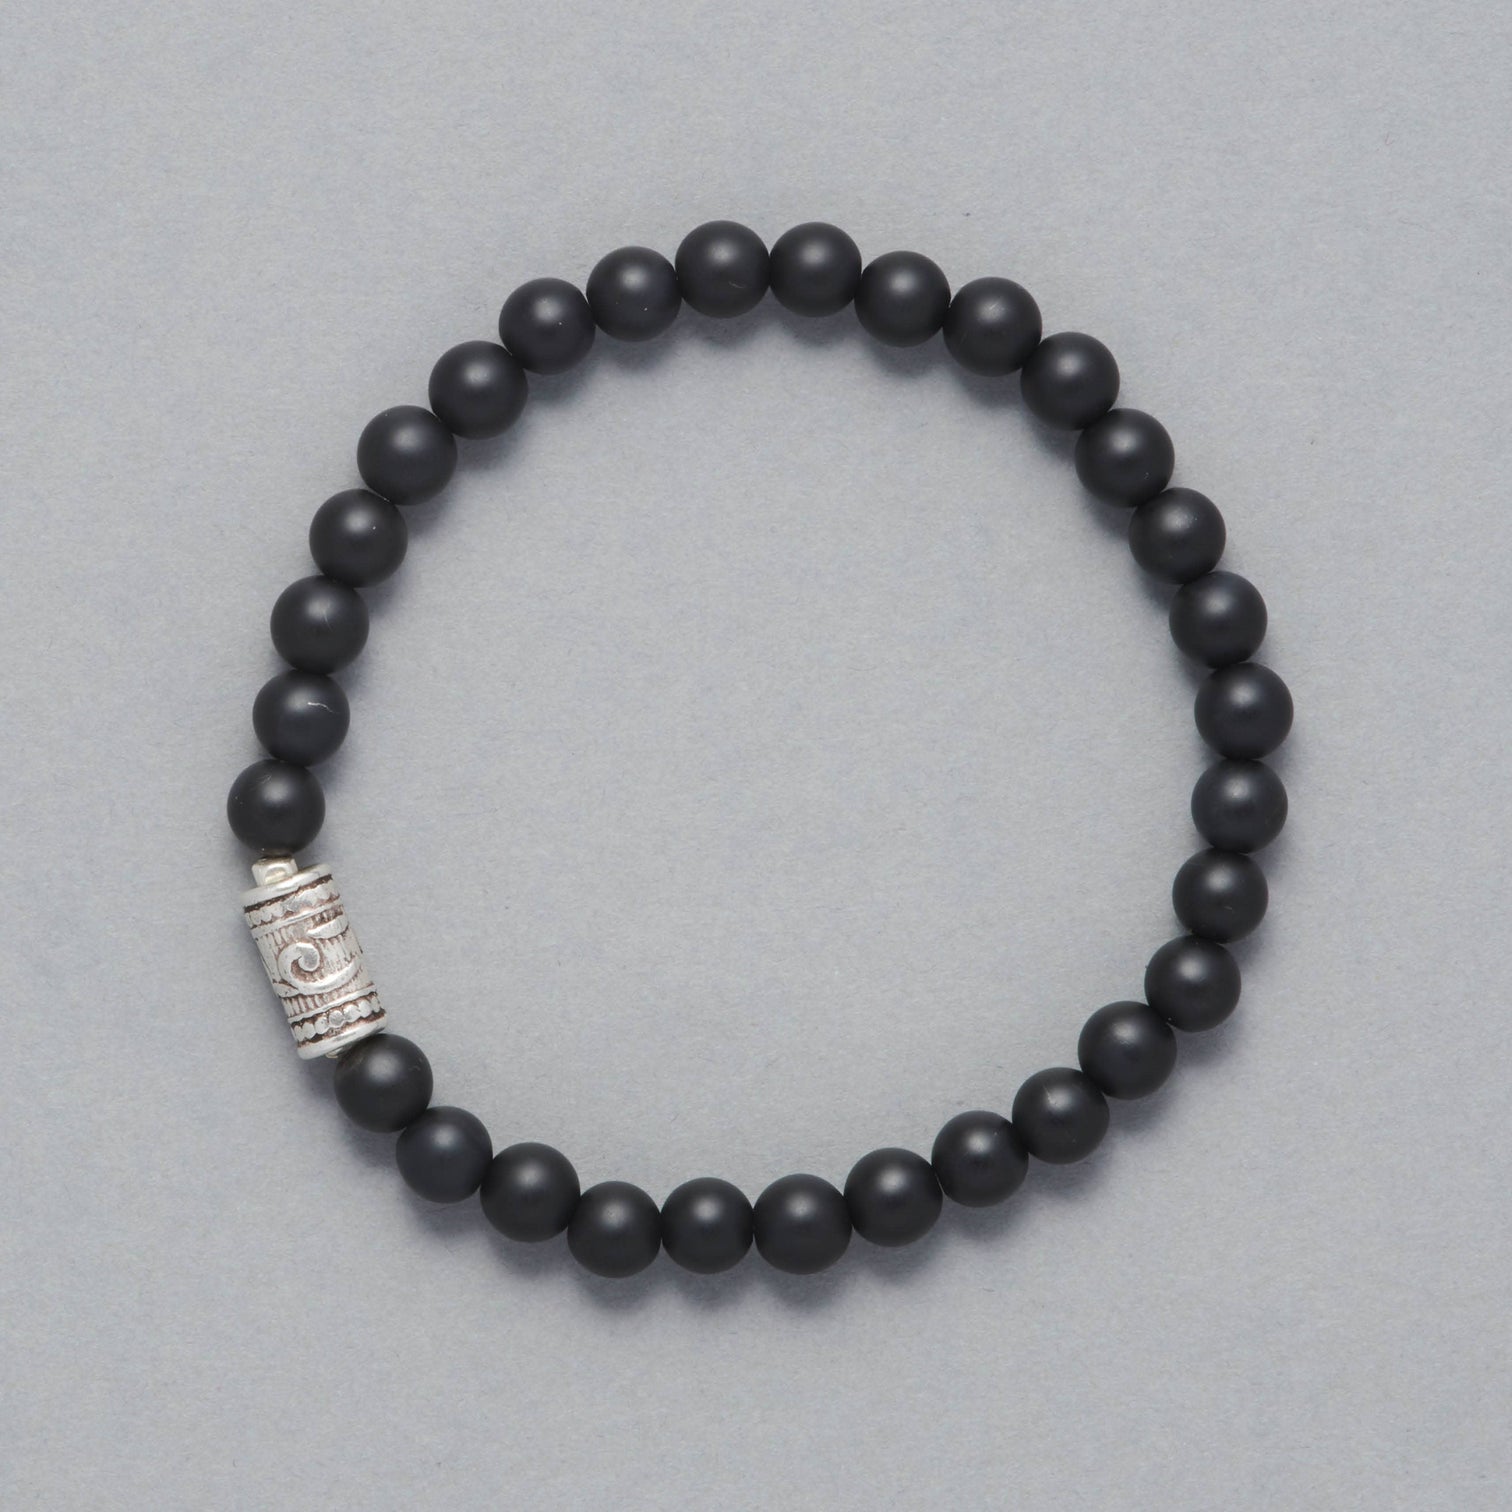 Product shot of the Maxim Men Beaded Bracelet made with Mat Black Onyx and a Sterling Silver Element.